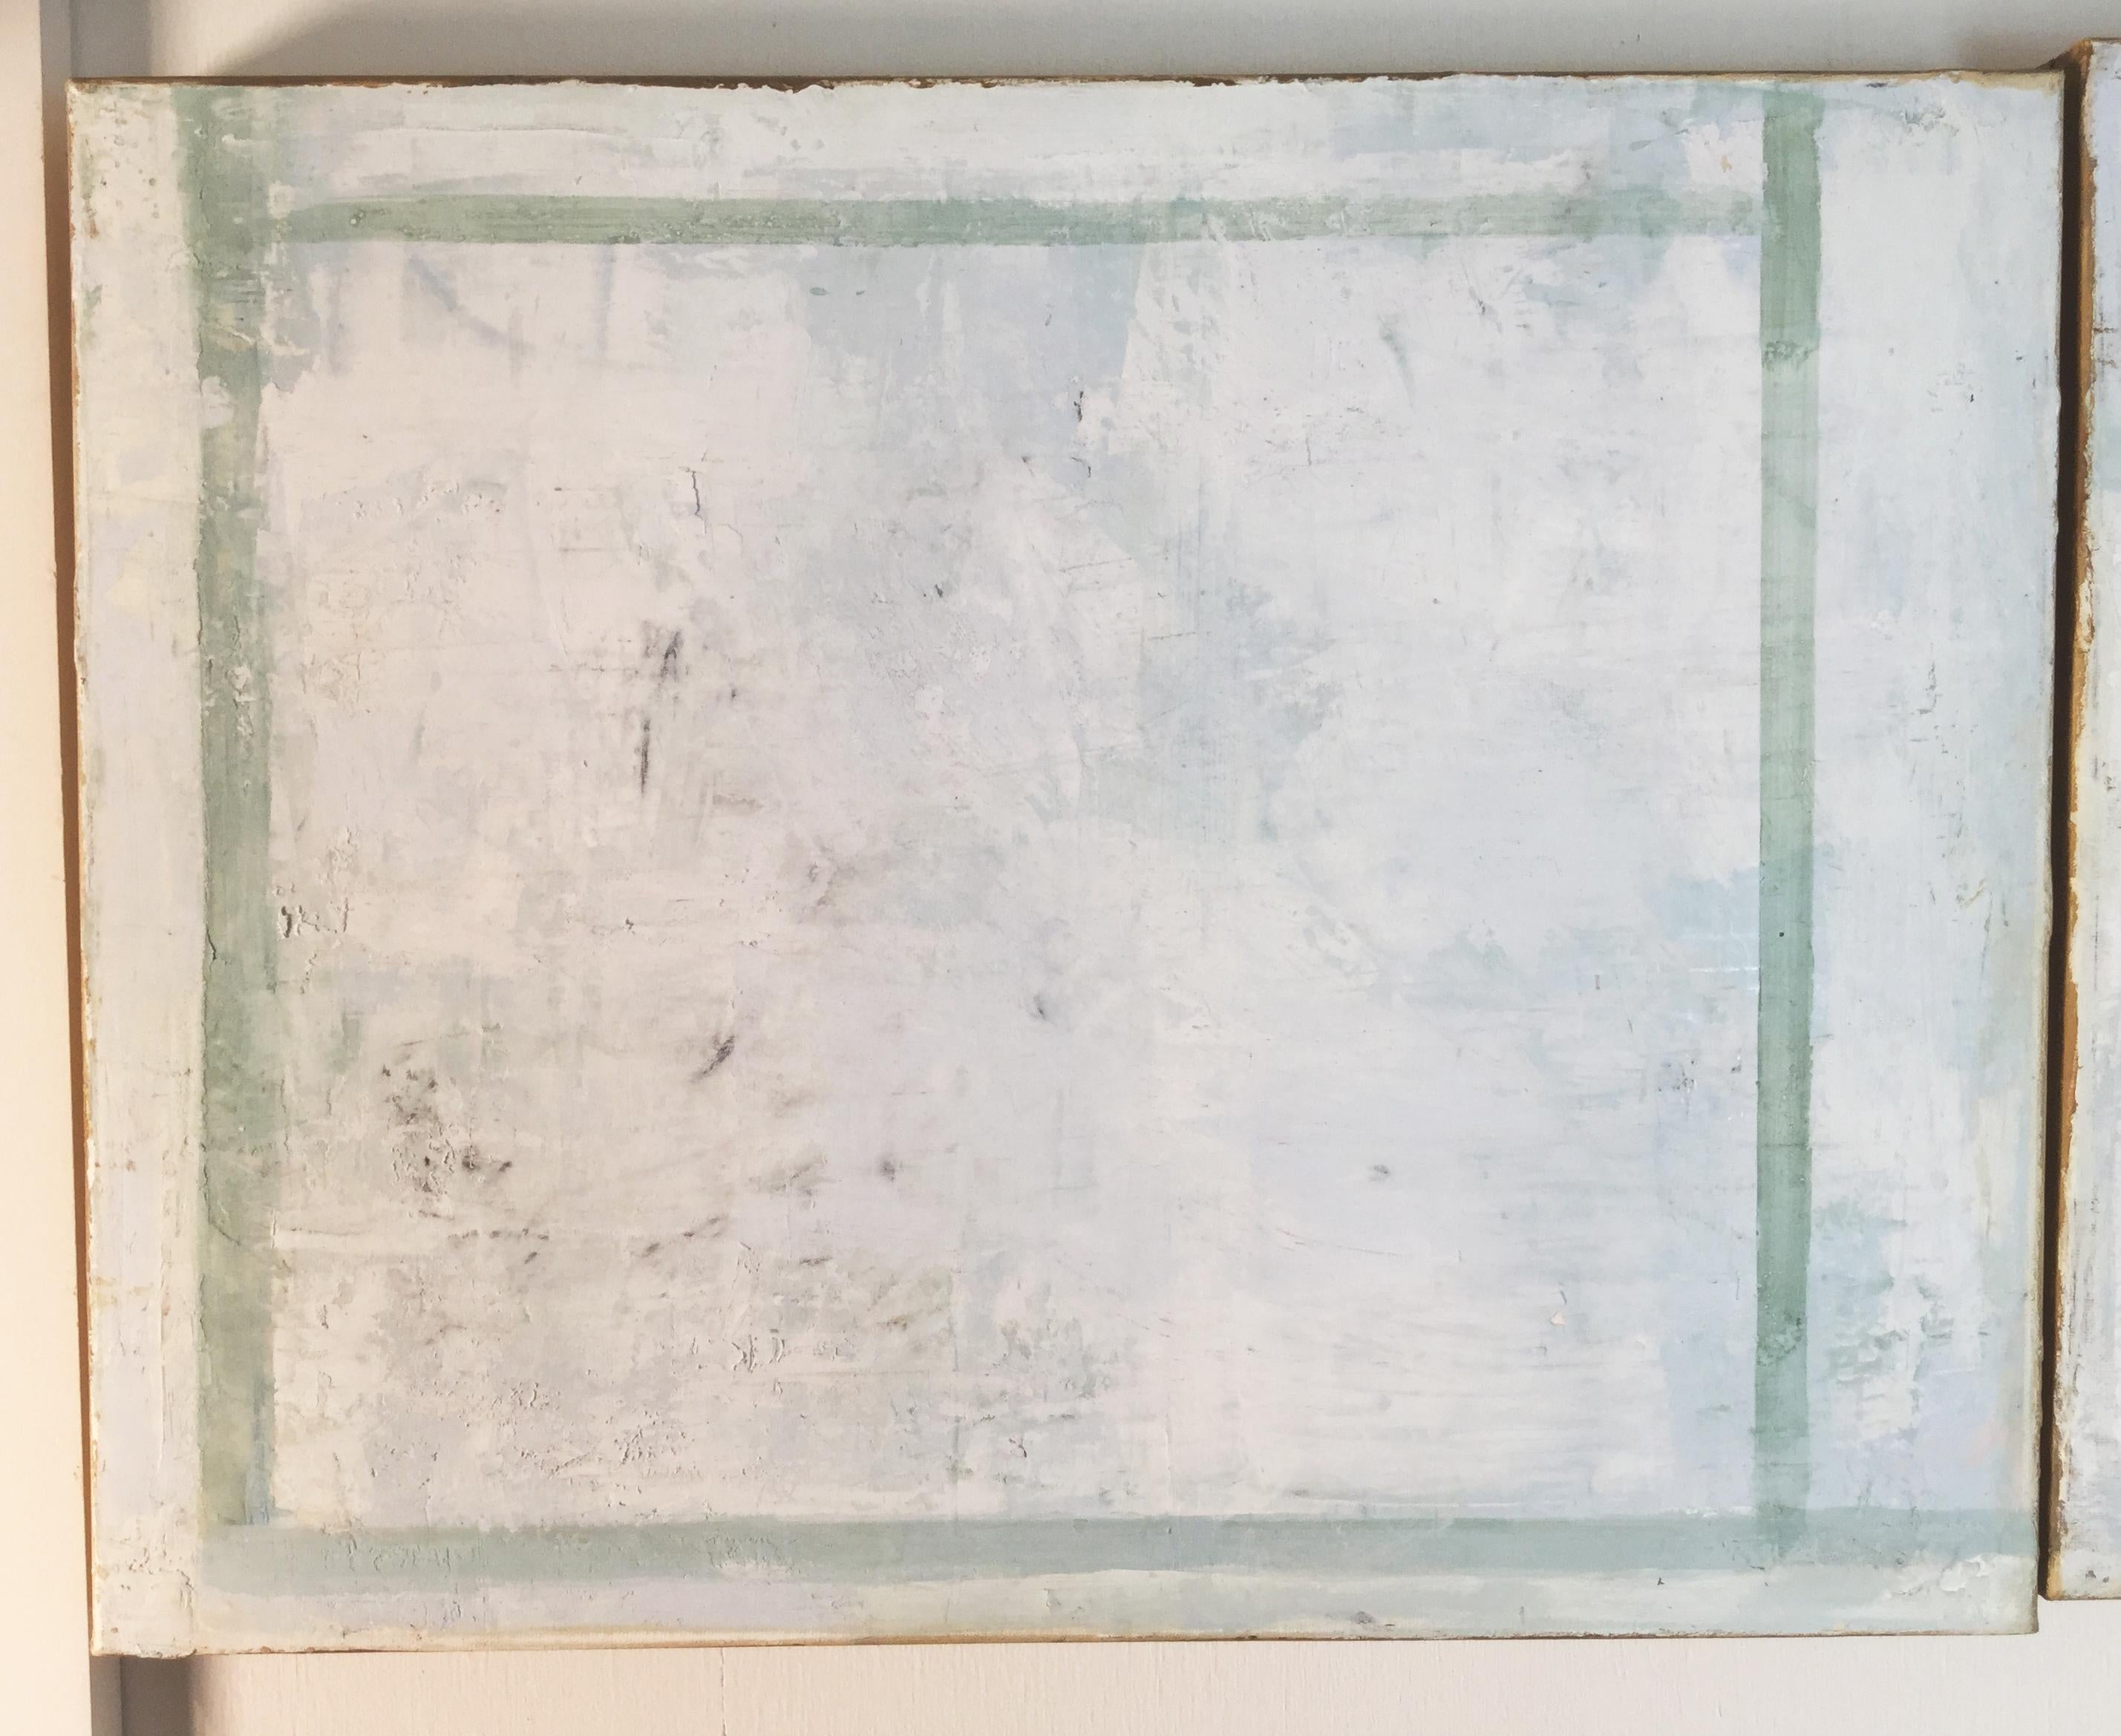 Contemporary abstract painting using mixed-media of venetian plaster, dyes with the artist built wood platform frame. The geometry of the series reflect the weight of plaster materials contrasted by the light and airy blue colors in the corners of